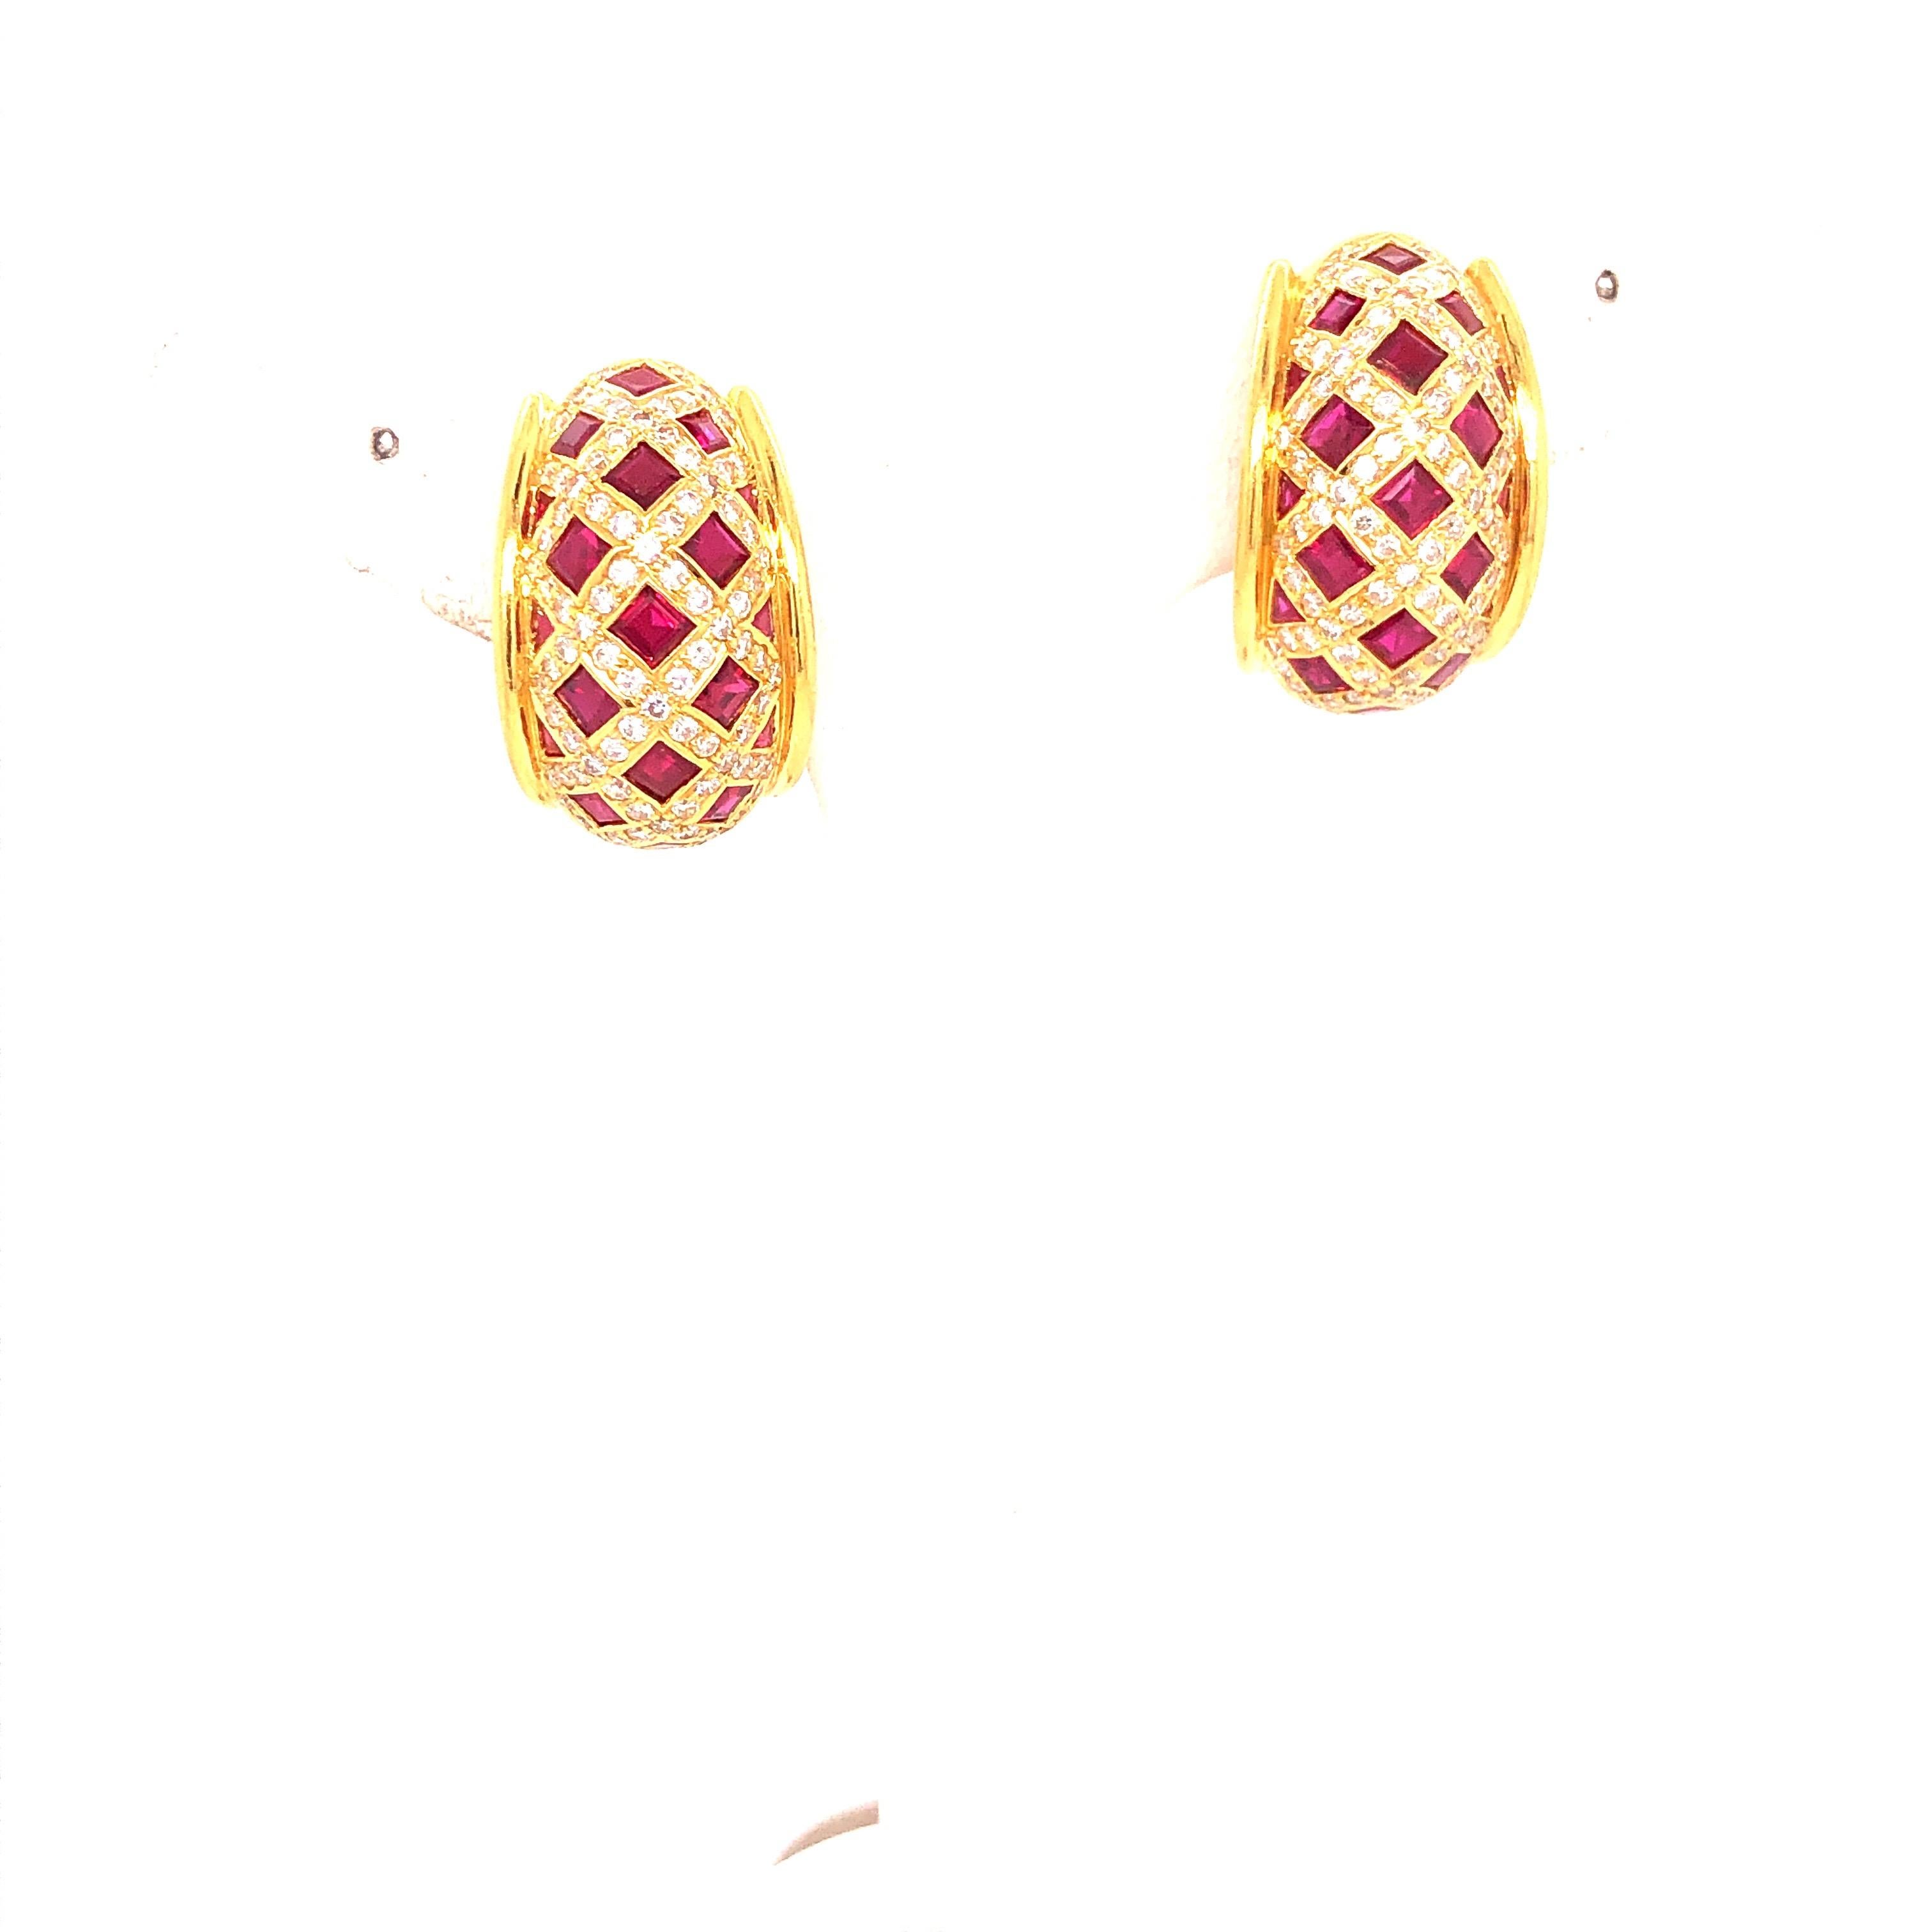 18K Yellow Gold Tiffany Company Ruby and Diamond Earrings.  These stunning earrings are Clip On.  Stamped T and C and 750.  Rubies are square shaped and calibre cut and Diamonds are Round.  Thirty six total rubies.